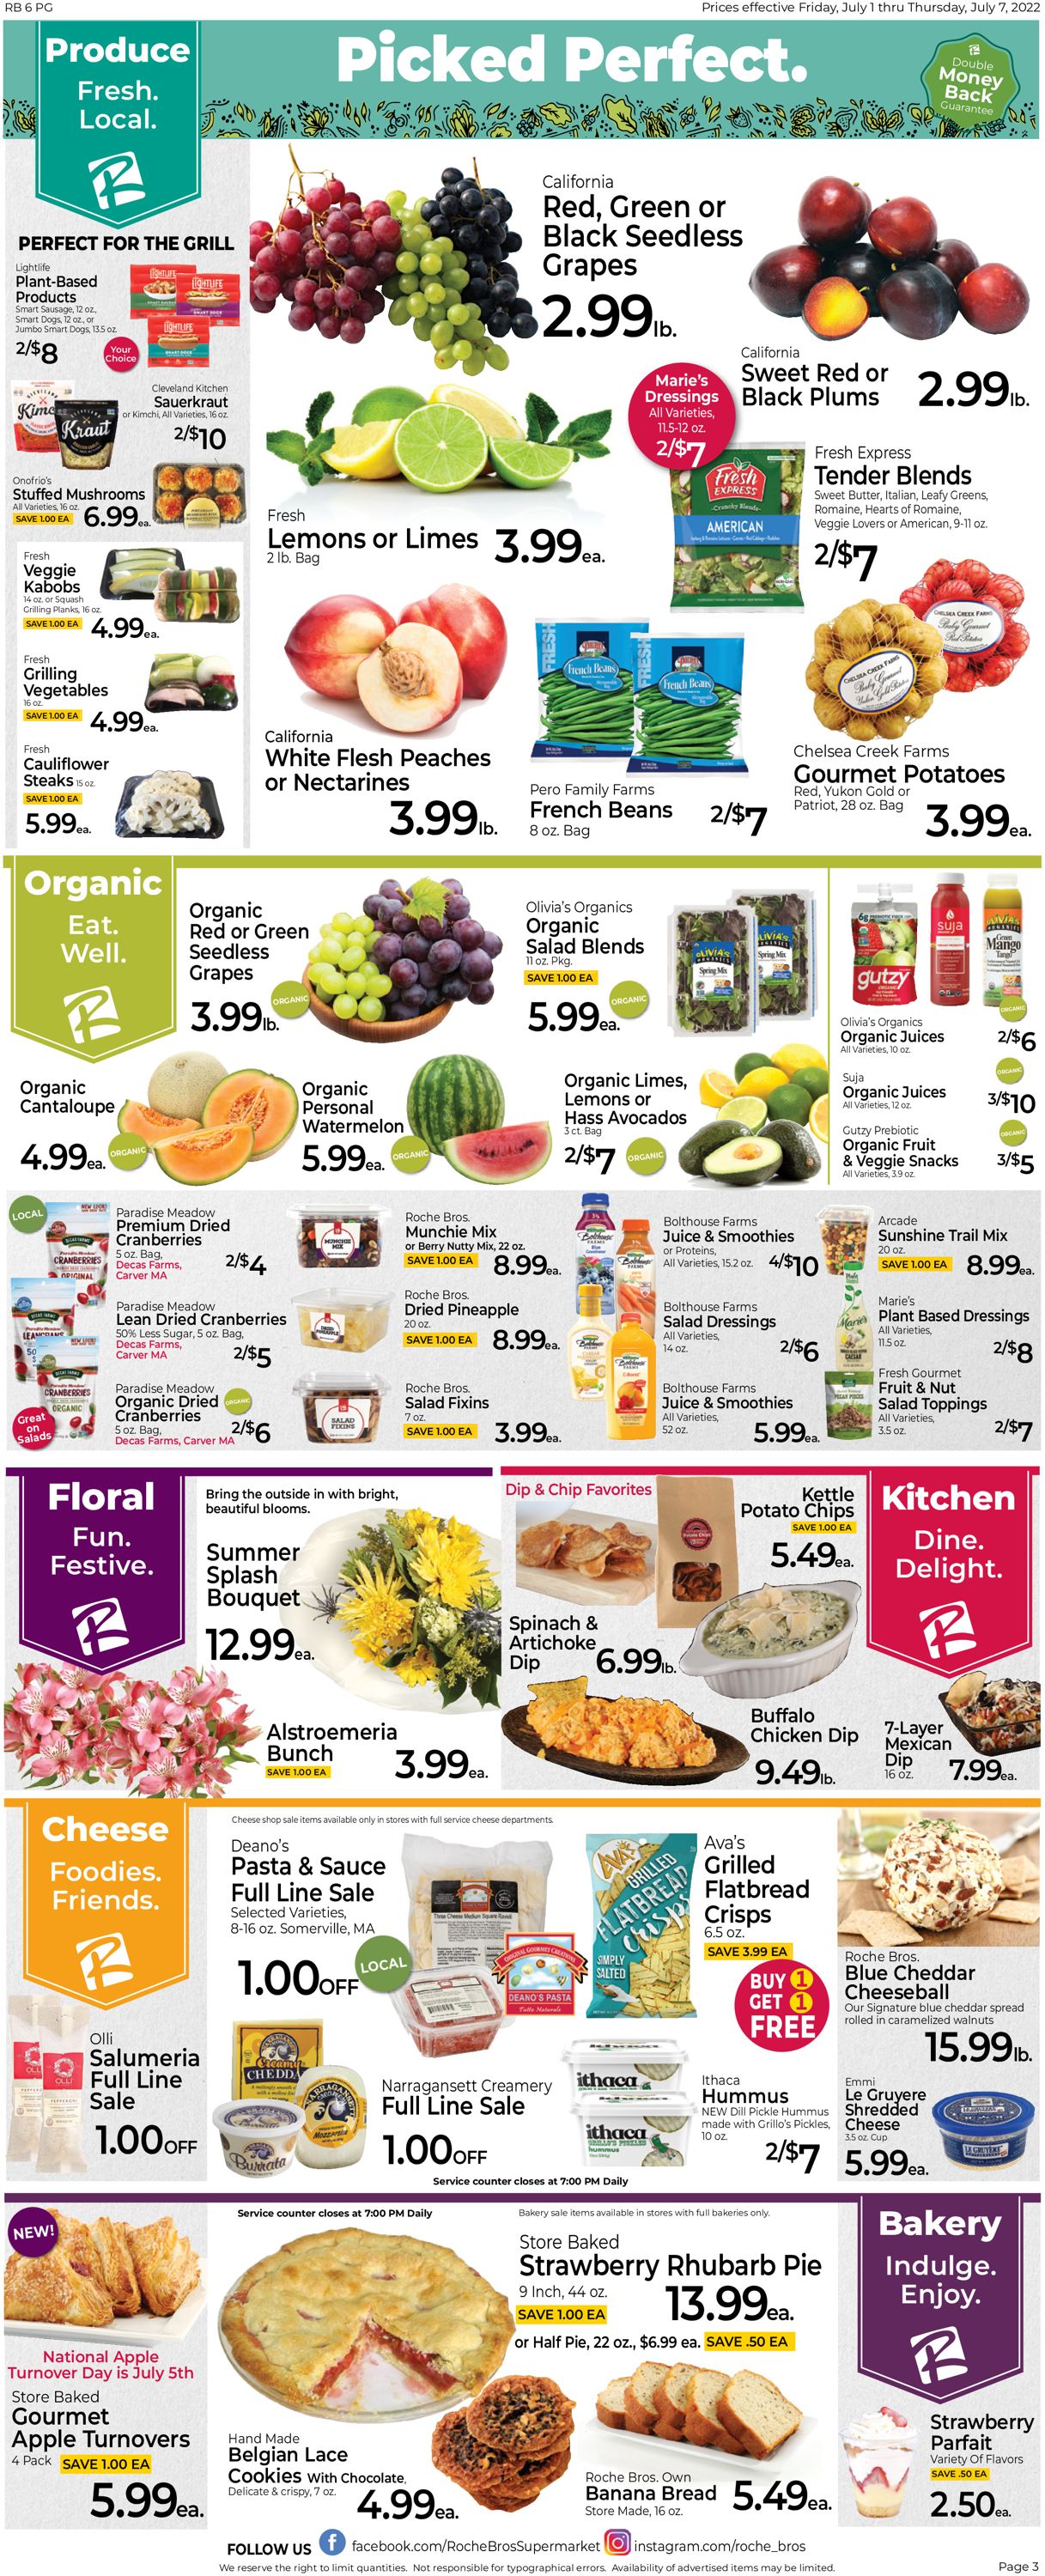 Roche Bros. Supermarkets - 4th of July Sale Weekly Ad Circular - valid 07/01-07/07/2022 (Page 3)